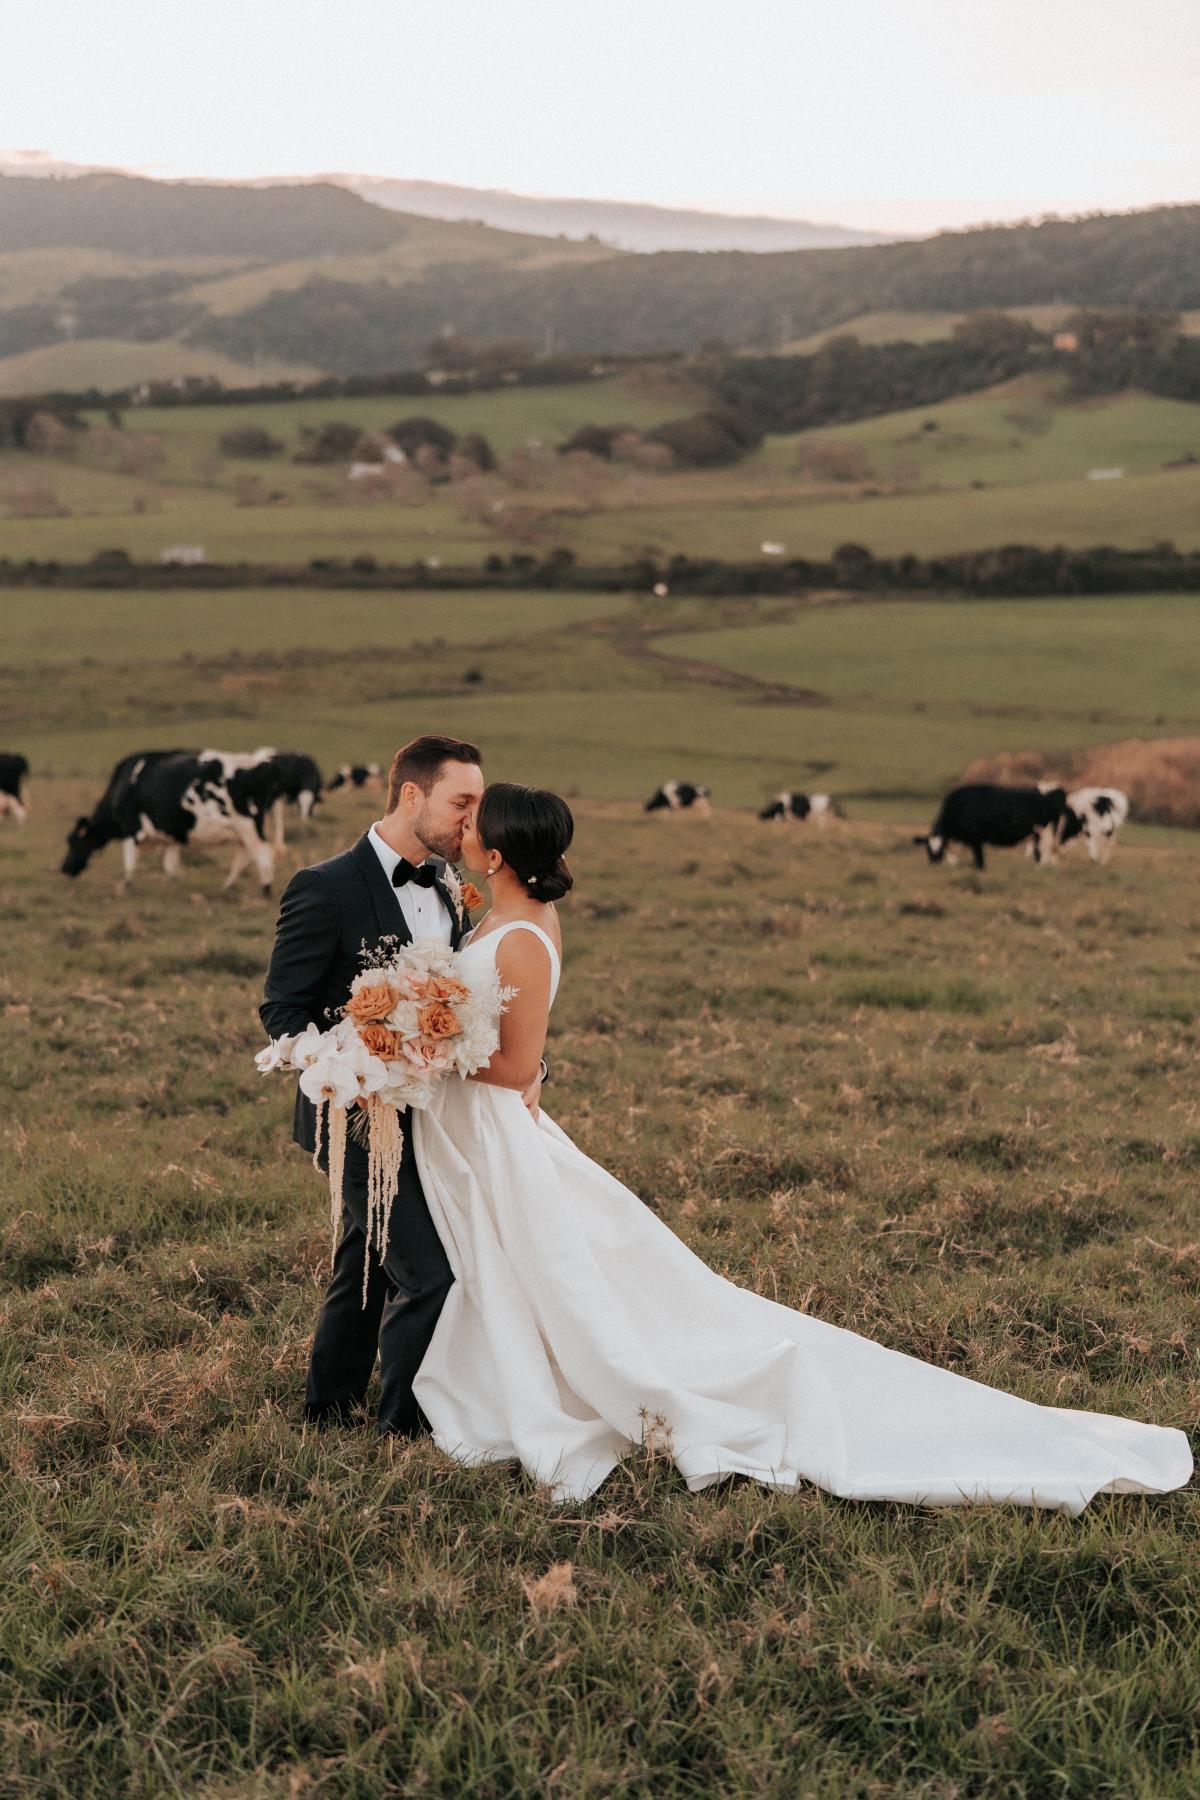 KWH real bride Rebecca and Matthew kissing in front of a field of cows in her classic Leonie Melanie gown, a modern bridal ballgown wedding dress with V-neck.